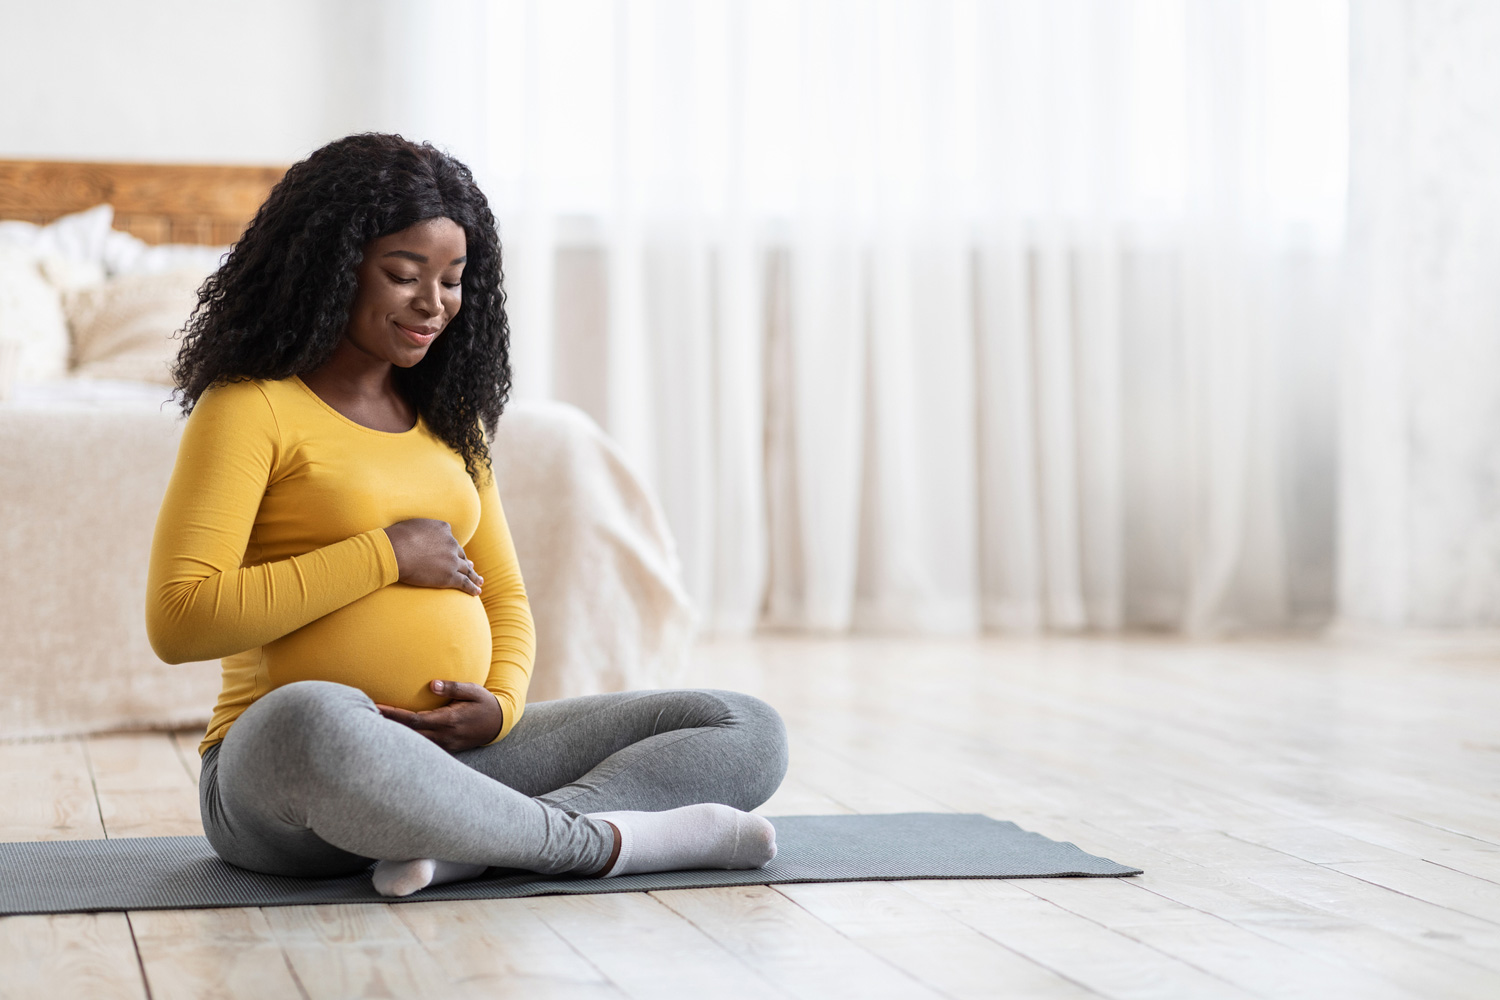 A pregnant woman is sitting on a yoga mat in her bedroom.